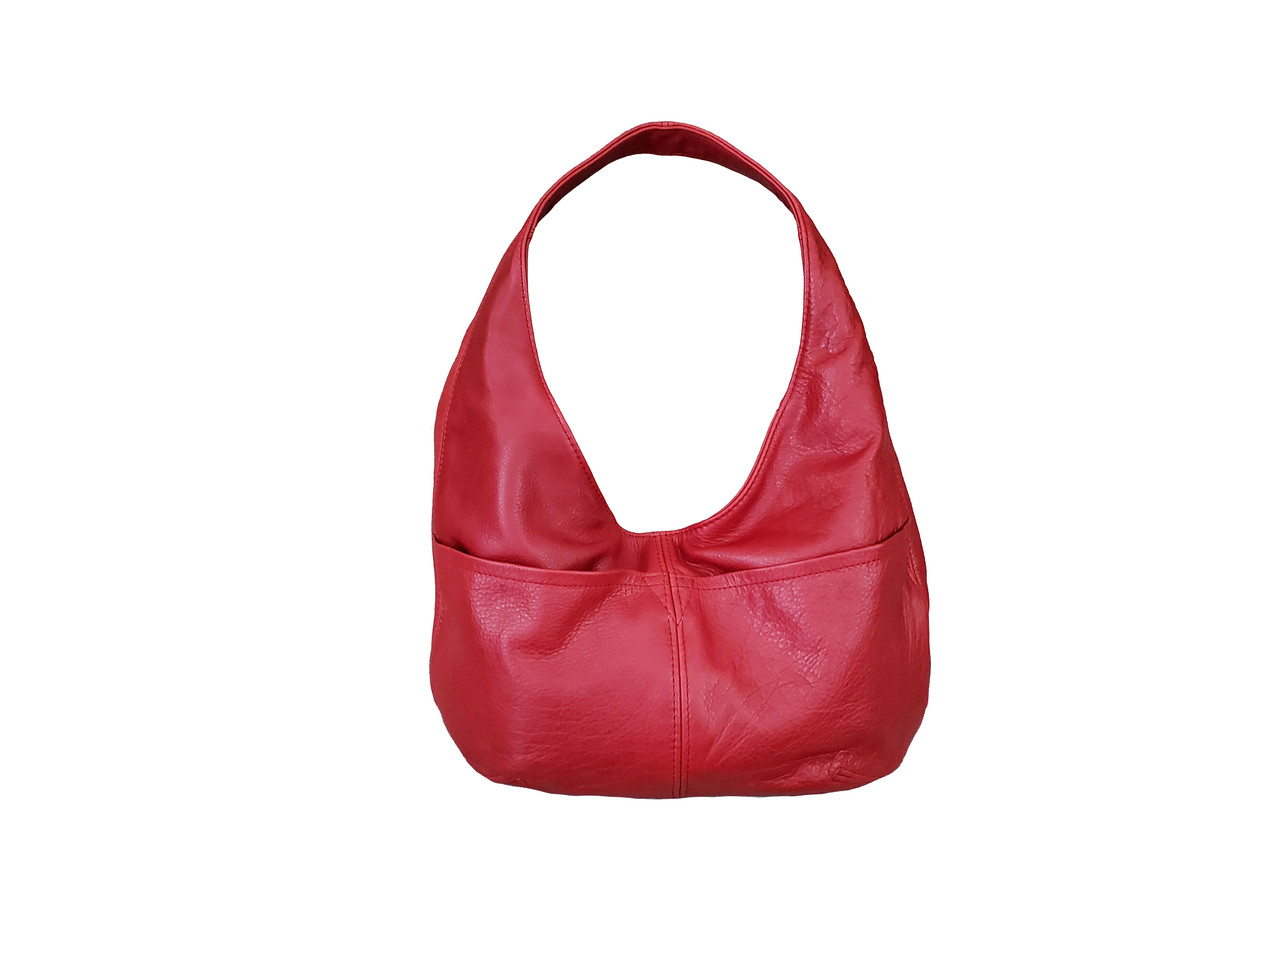 Prada red suede leather hobo bag purse with | Leather hobo bag, Bags,  Leather hobo